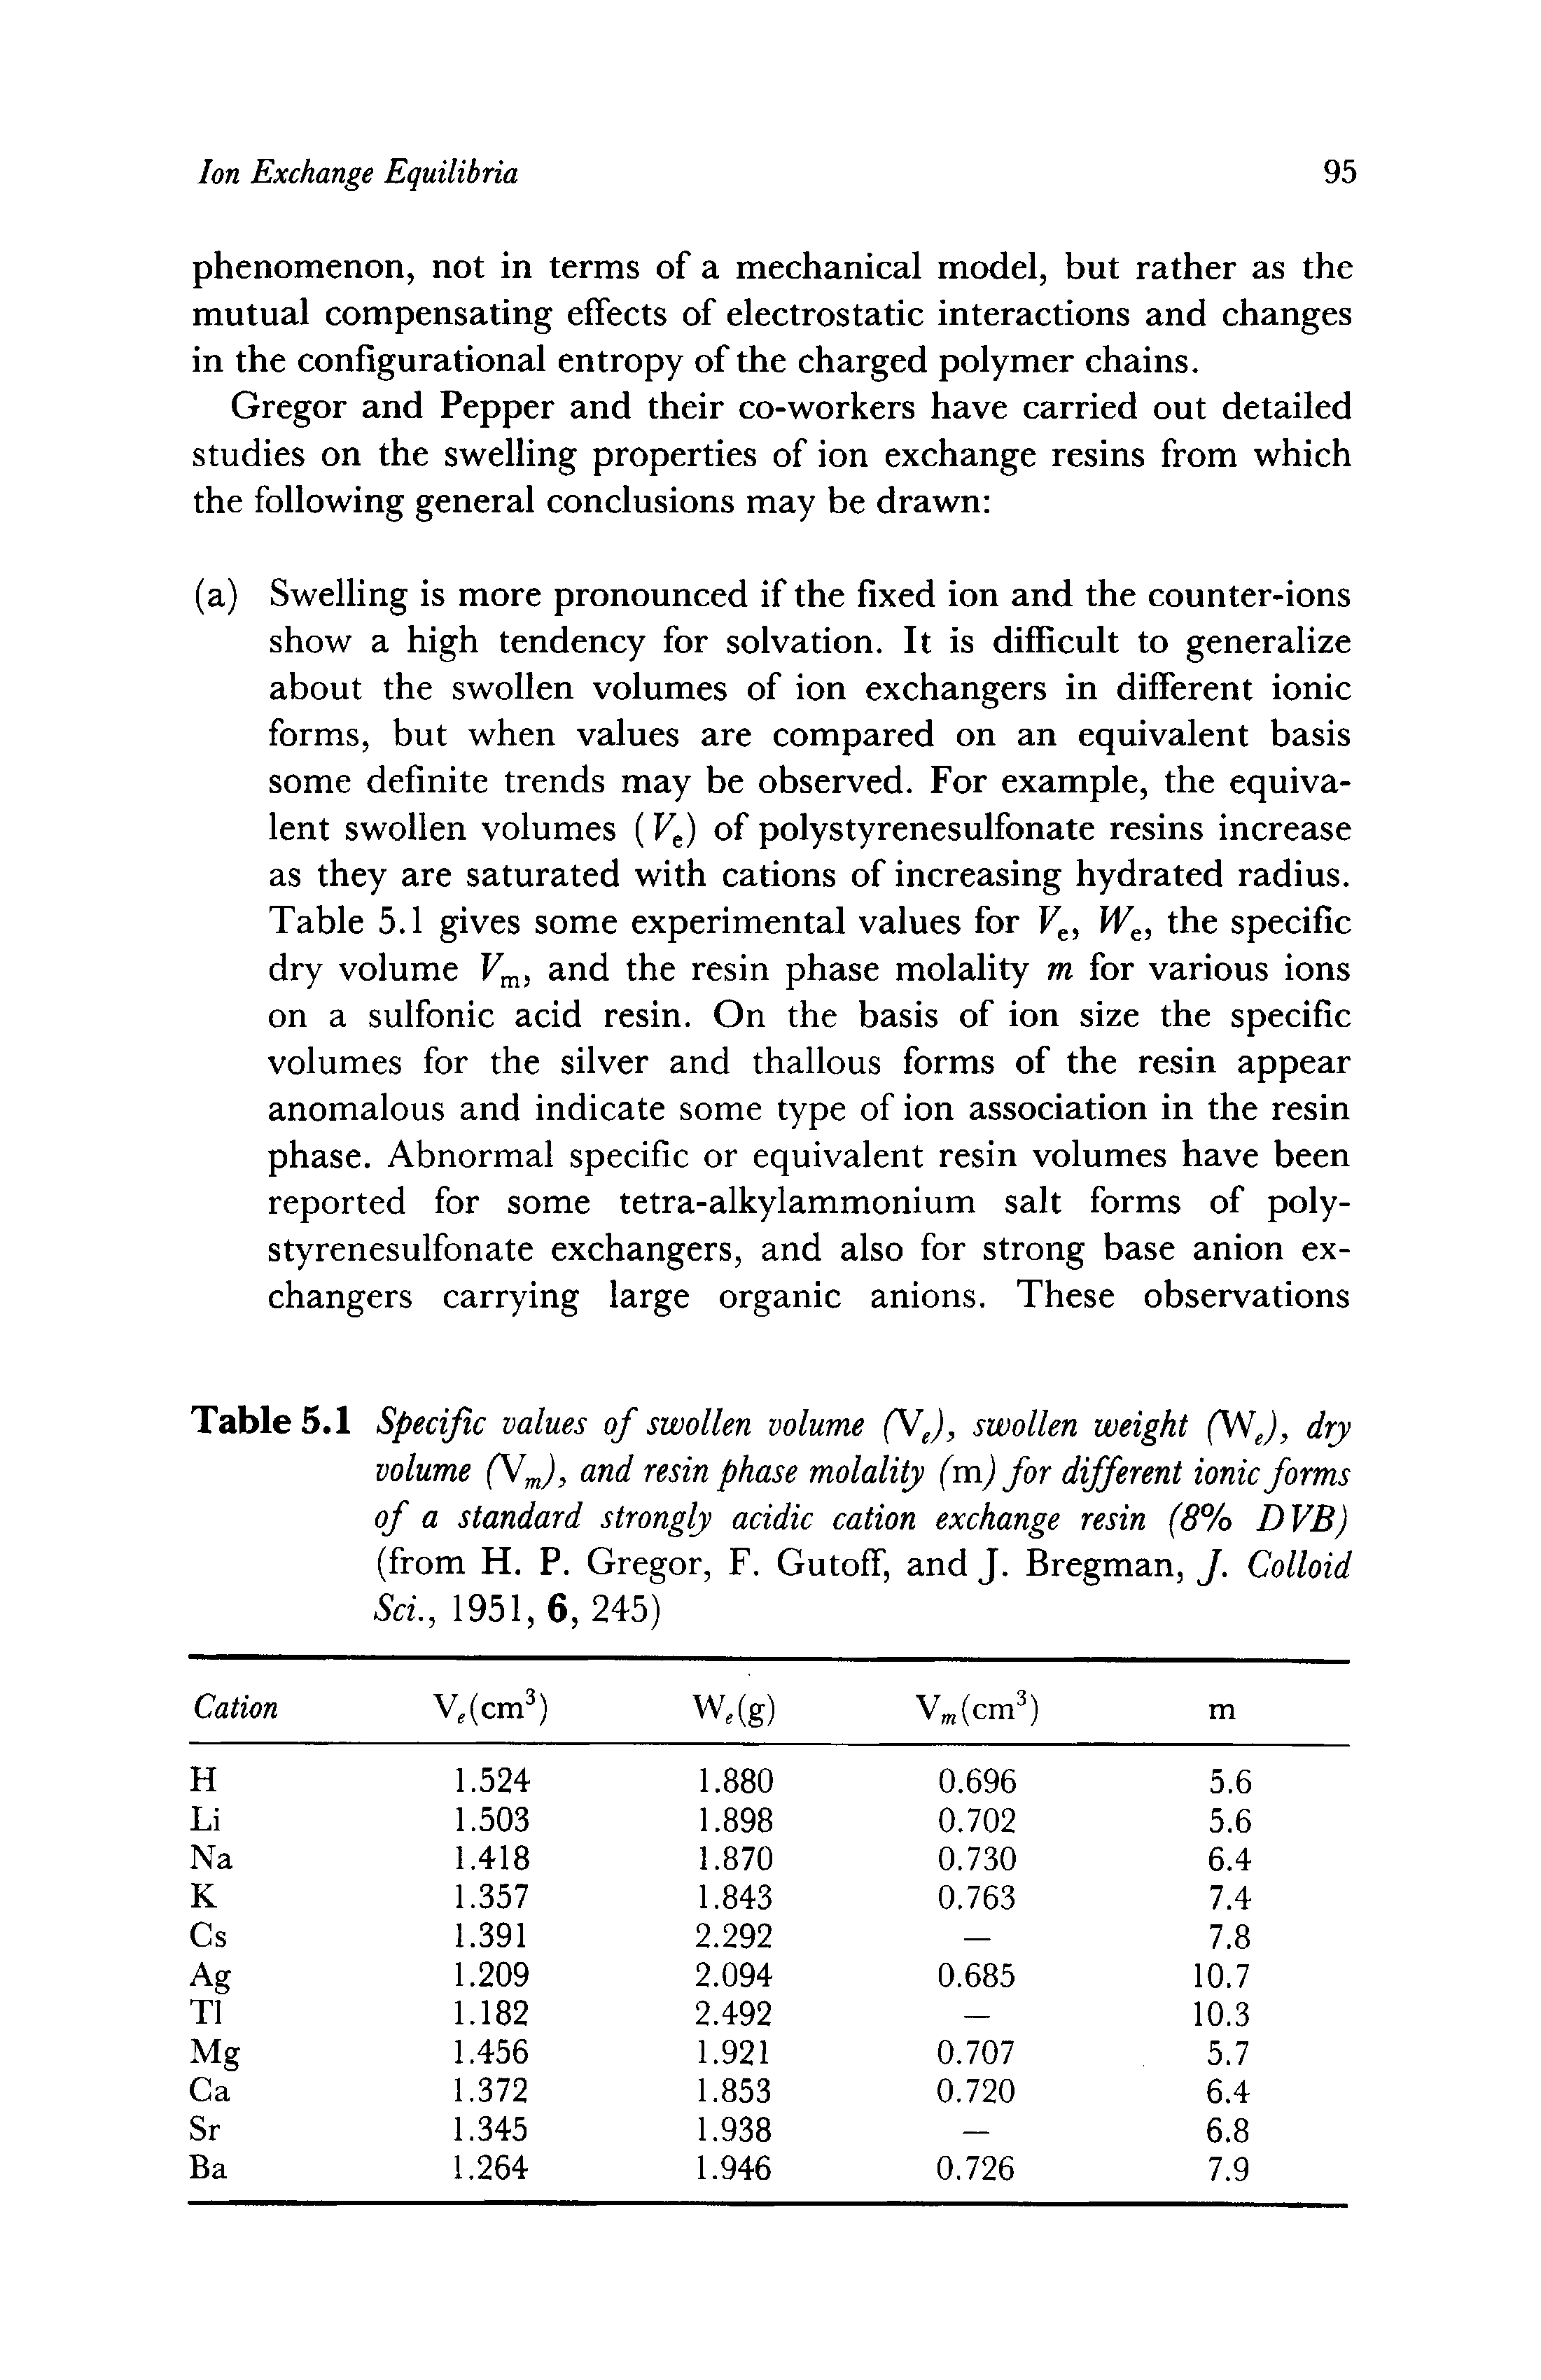 Table 5.1 Specific values of swollen volume (VJ, swollen weight (TVJ, dry volume (W ), and resin phase molality (va) for different ionic forms of a standard strongly acidic cation exchange resin (8% DVB) (from H. P. Gregor, F. Gutoff, and J. Bregman, J. Colloid Sci., 1951, 6, 245)...